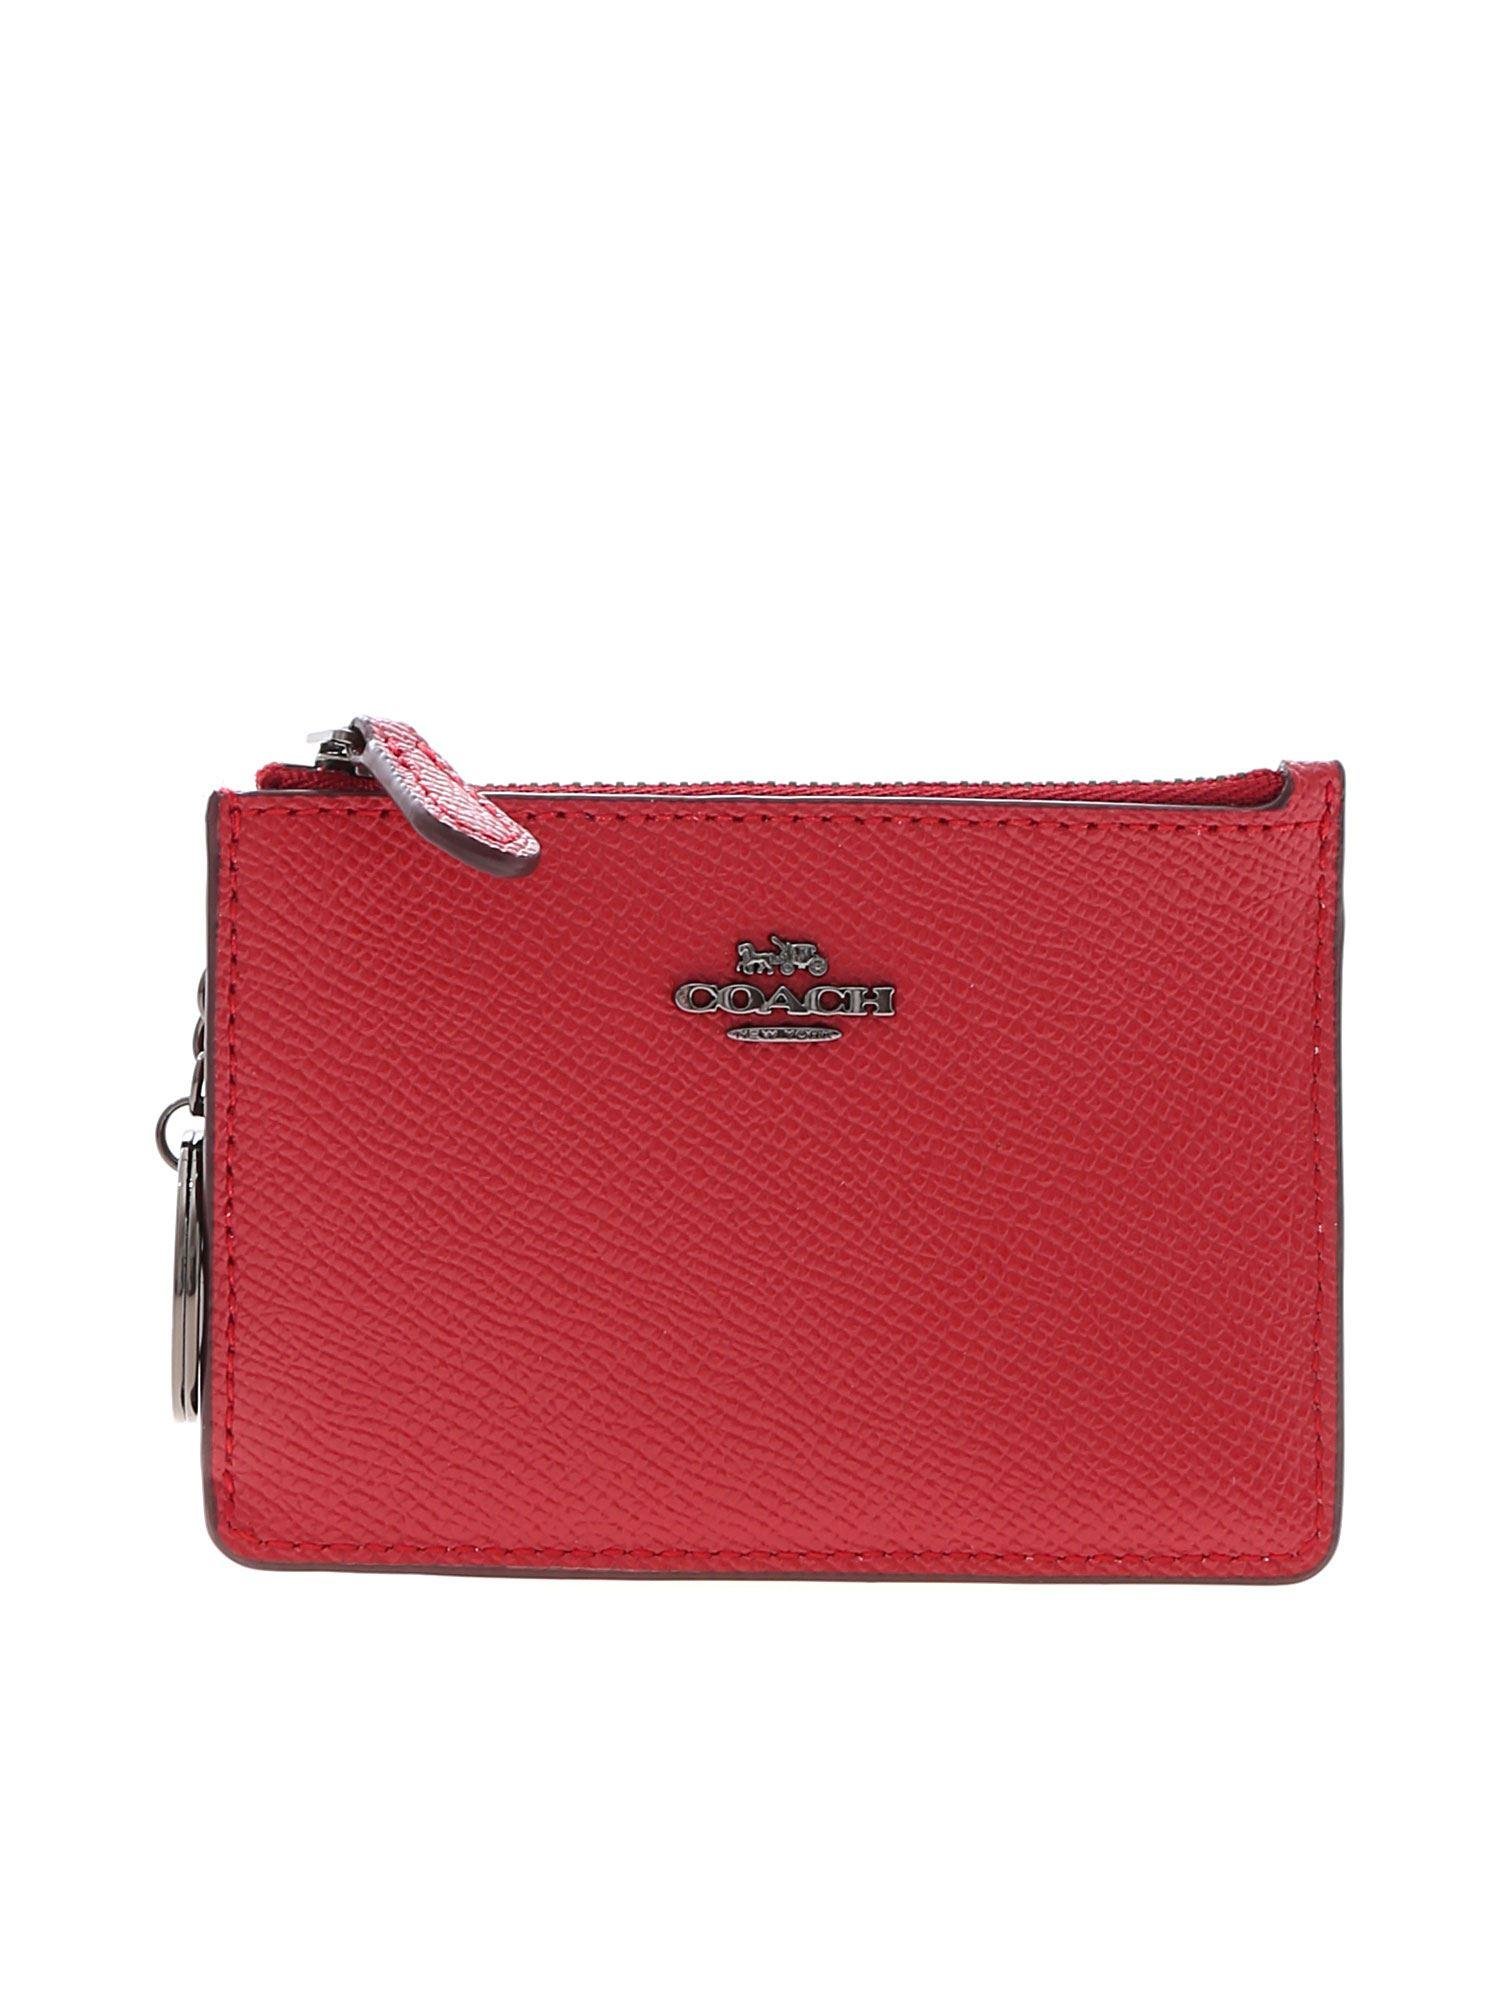 COACH Leather Mini Skinny Coin Purse In Red for Men - Lyst